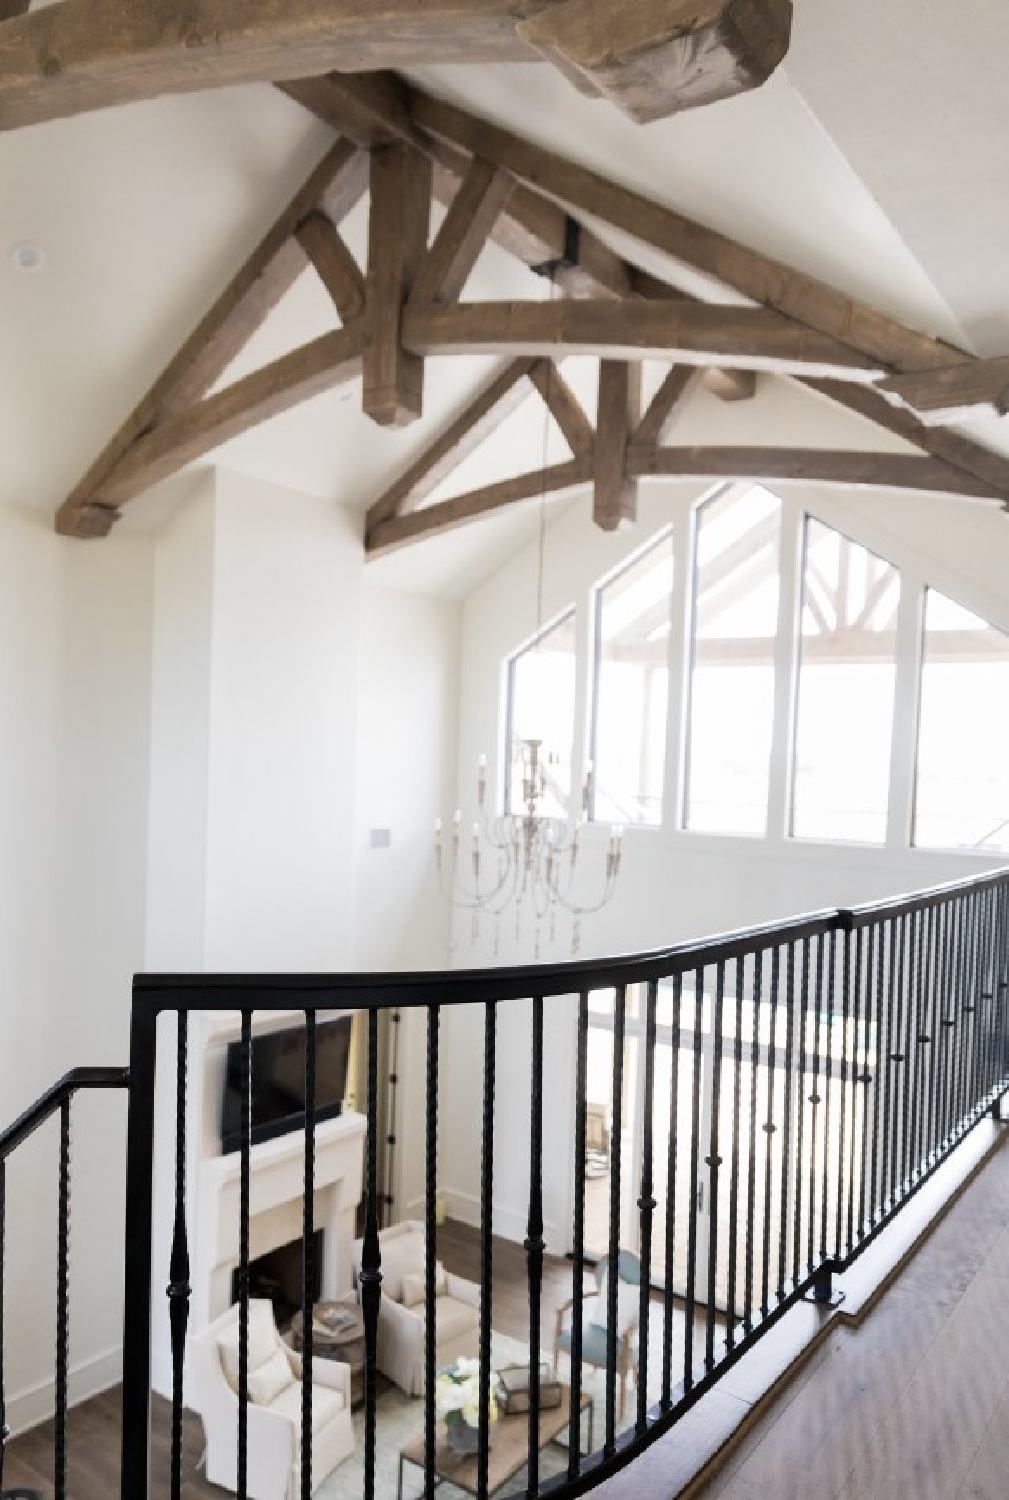 SW Alabaster on walls in a lofty Country French home with rustic wood trusses and elegant staircase - Brit Jones Design. #swalabaster